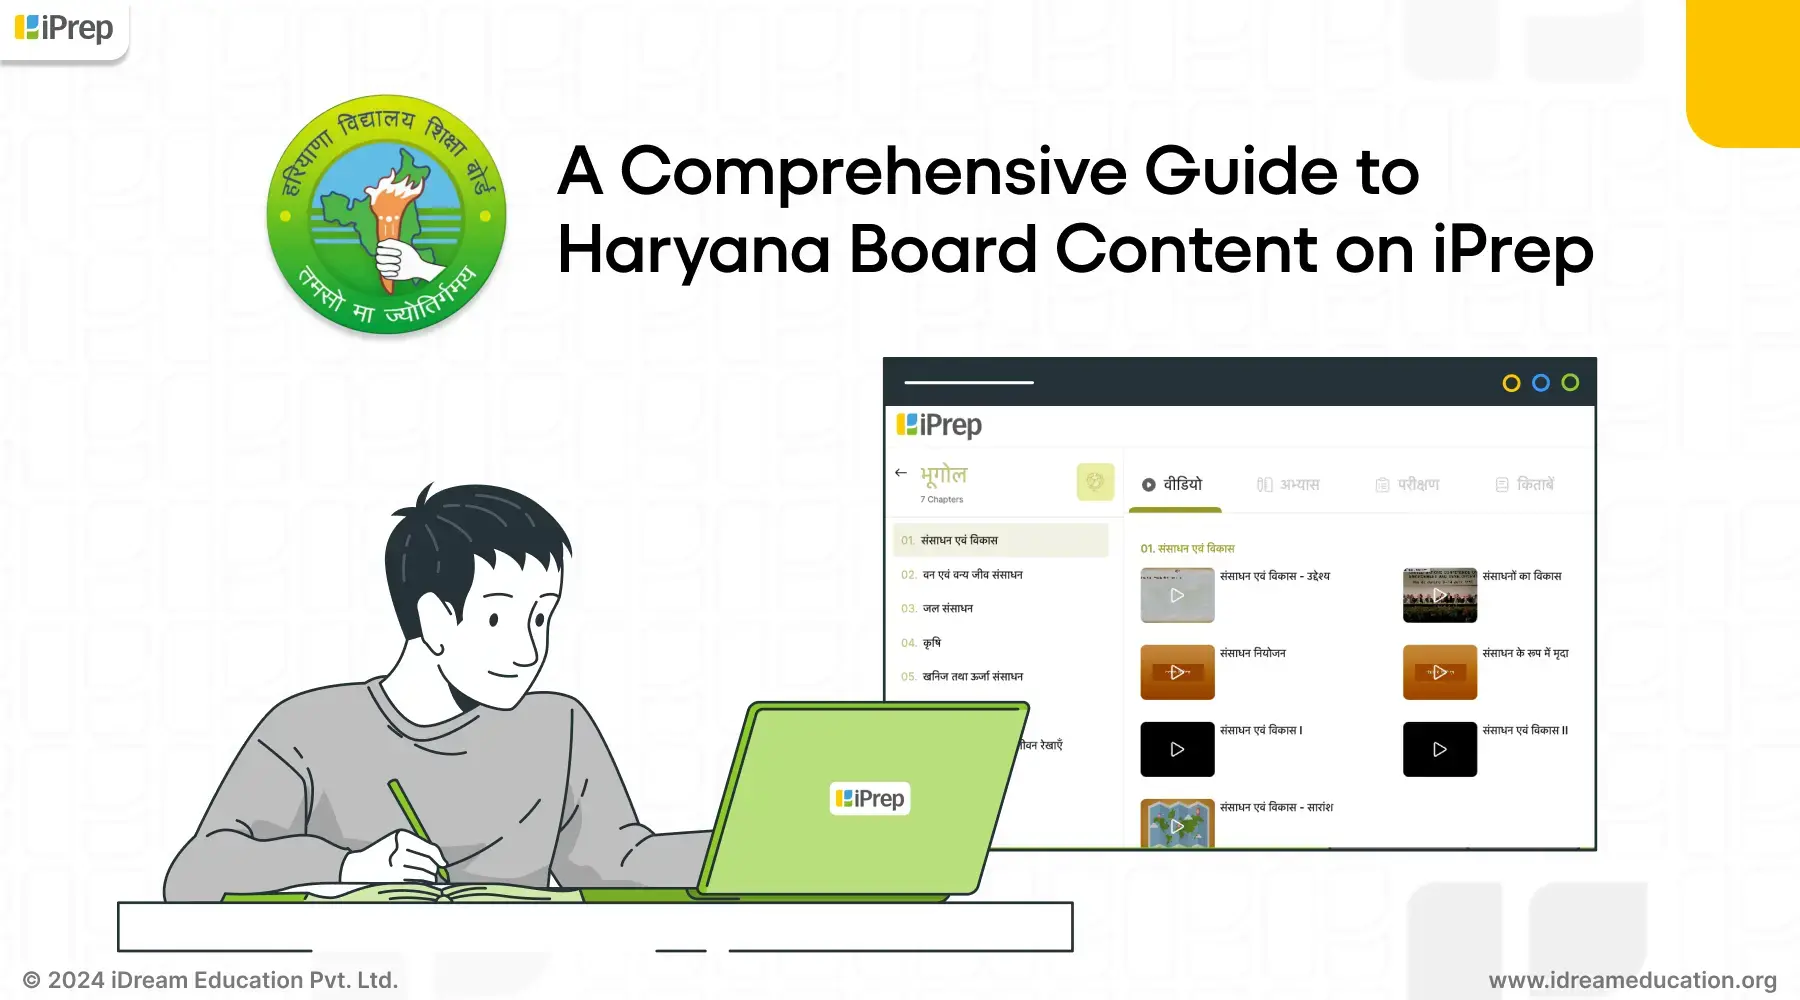 Illustration showing Haryana Board Content on iPrep by iDream Education